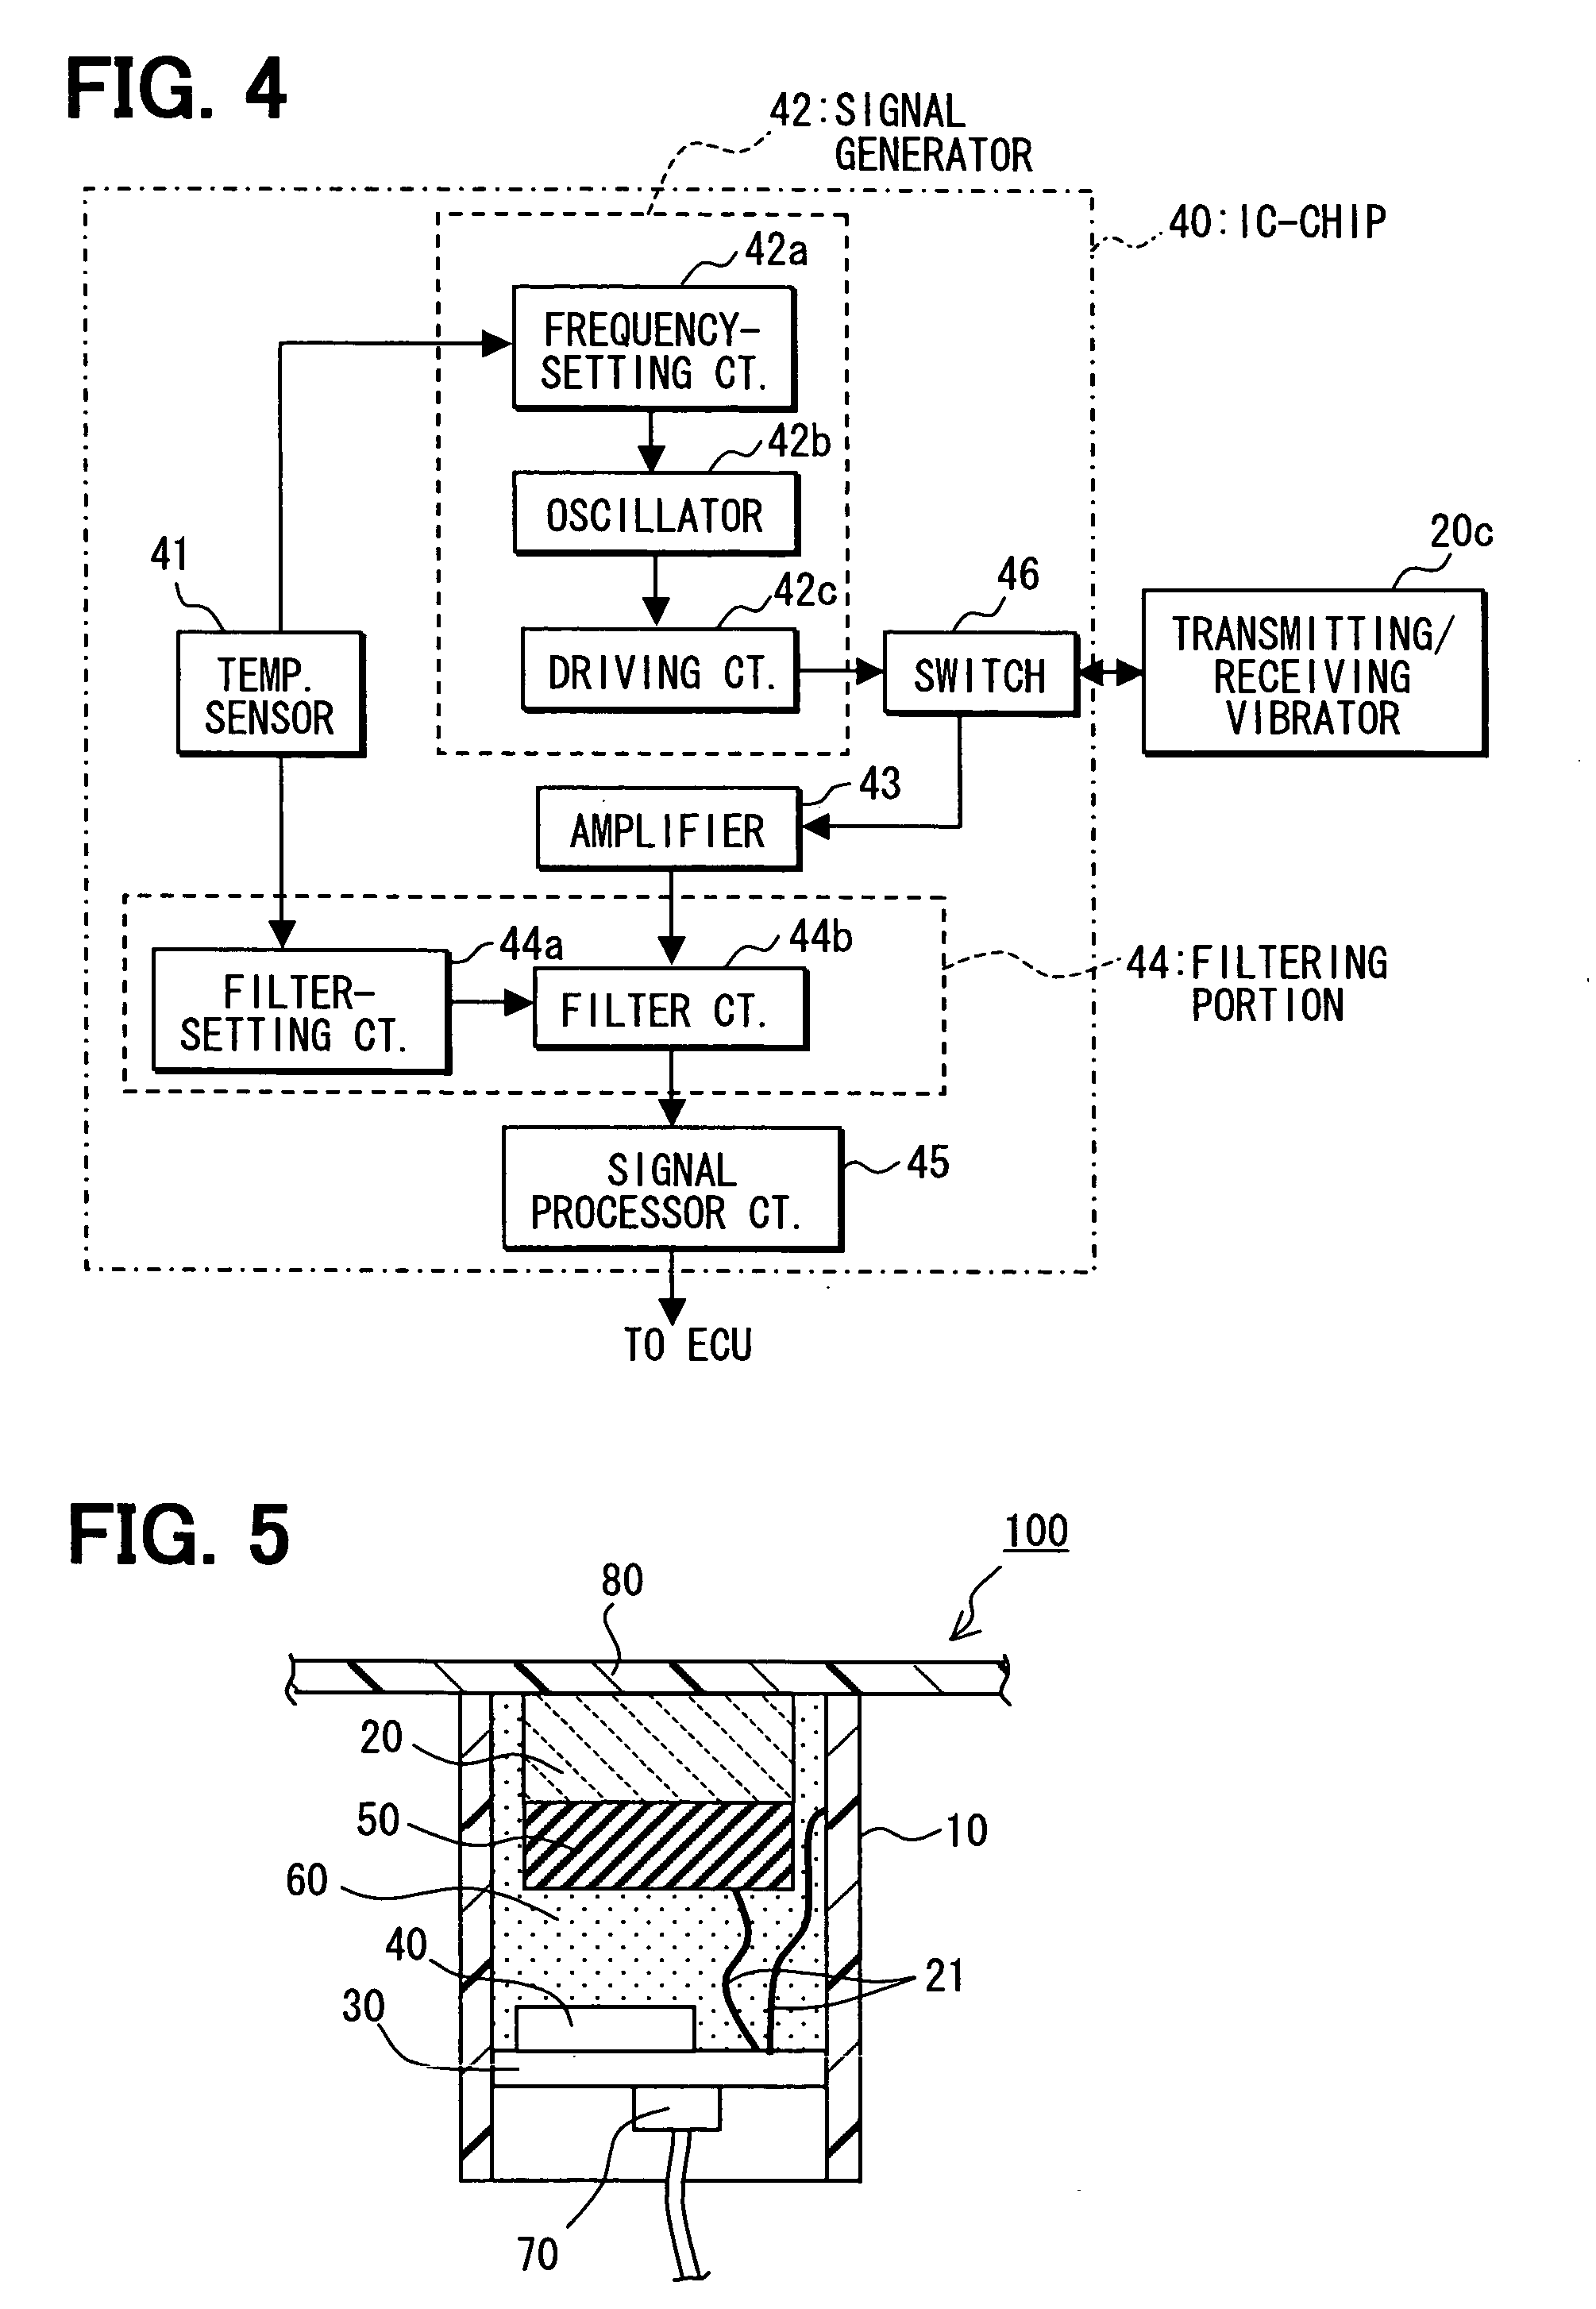 Ultrasonic sensor transmitting and receiving ultrasonic frequencies adjusted according to temperature